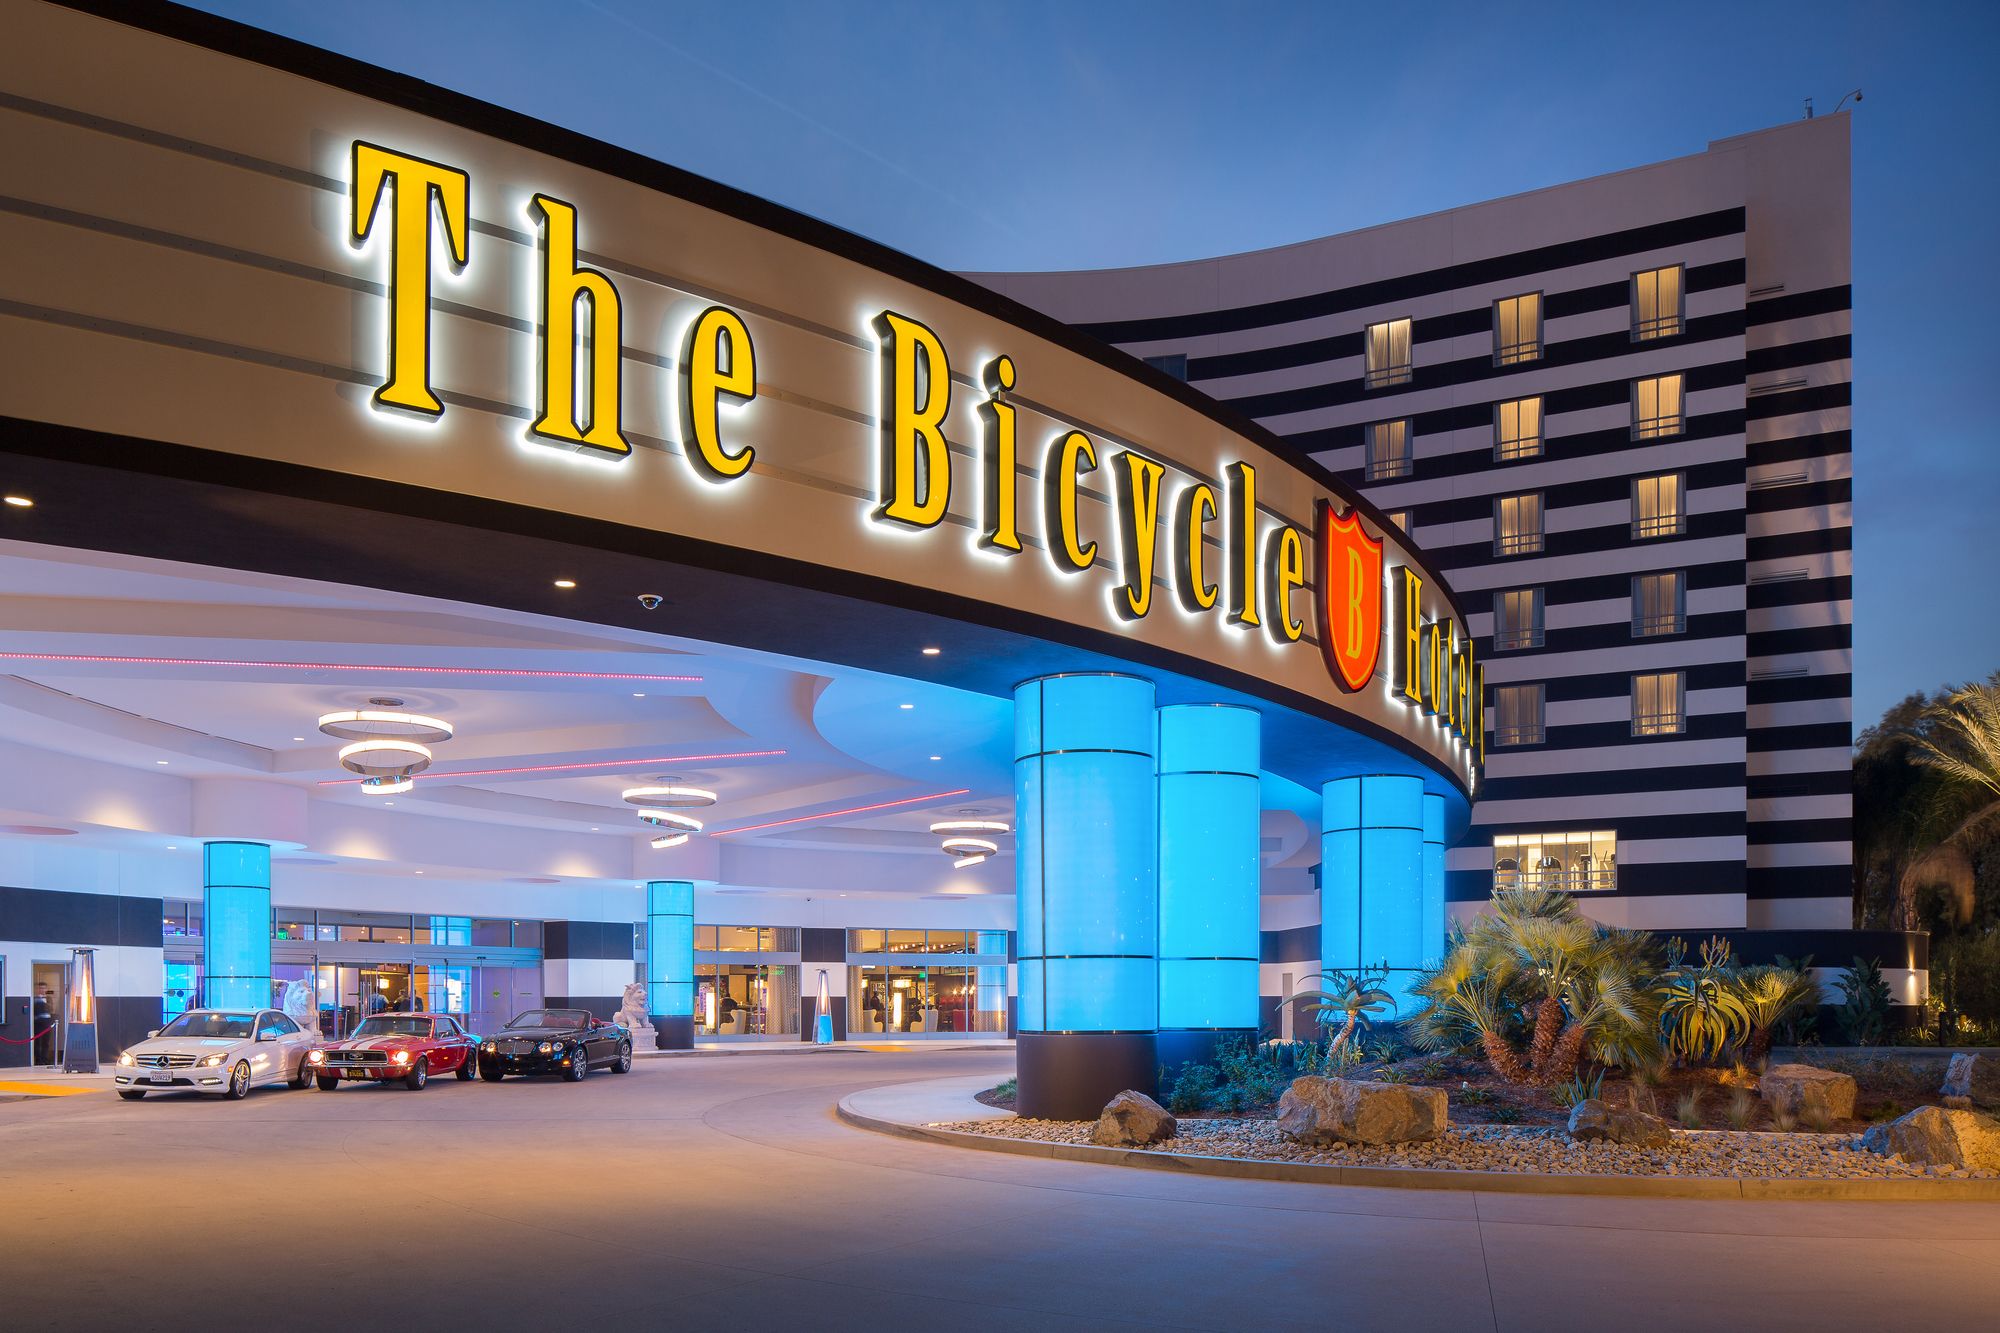 The Bicycle Casino Hotel